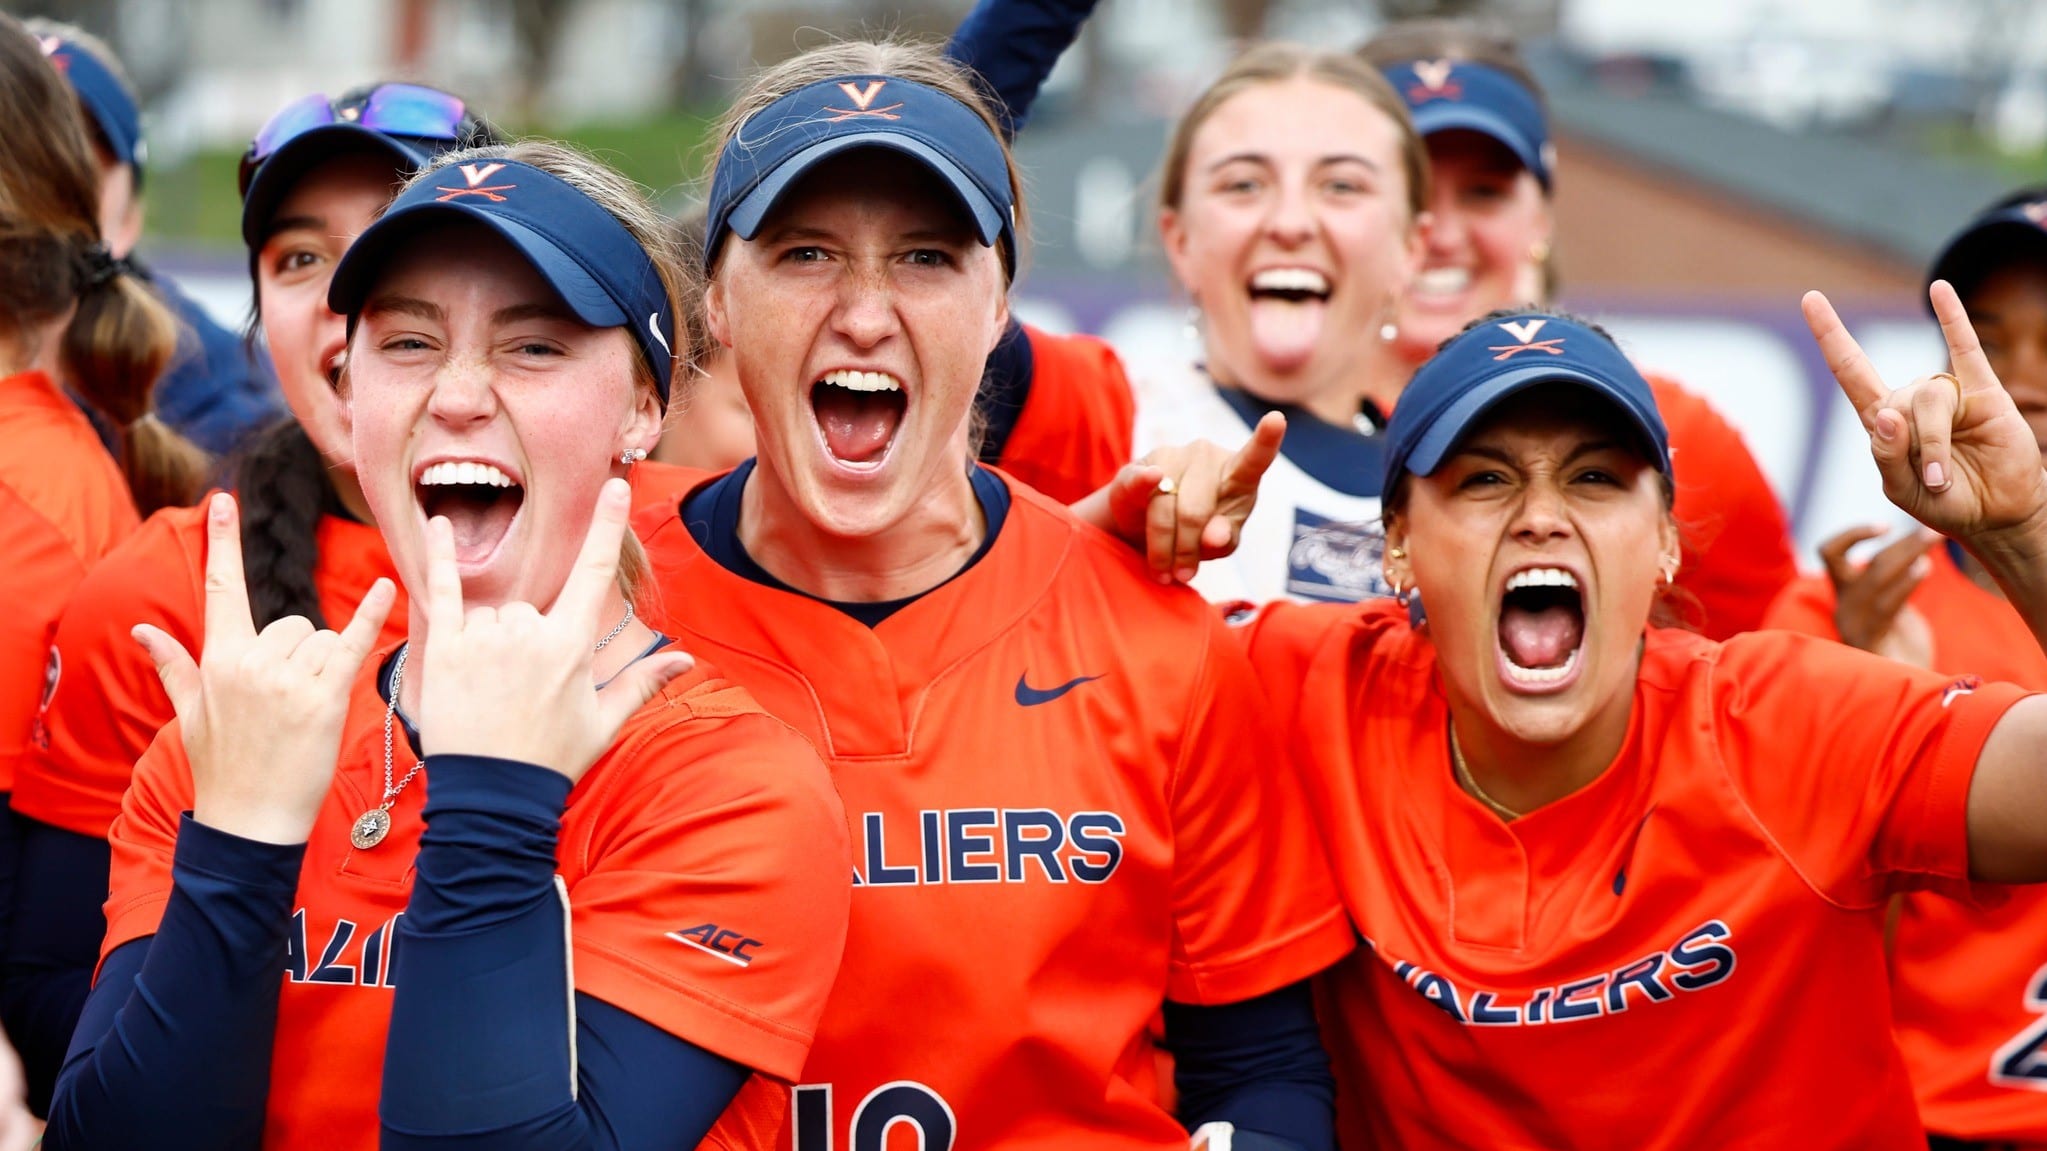 Reece Holbrook, Jade Hylton, and Abby Weaver celebrate after the Virginia softball team's victory at James Madison.